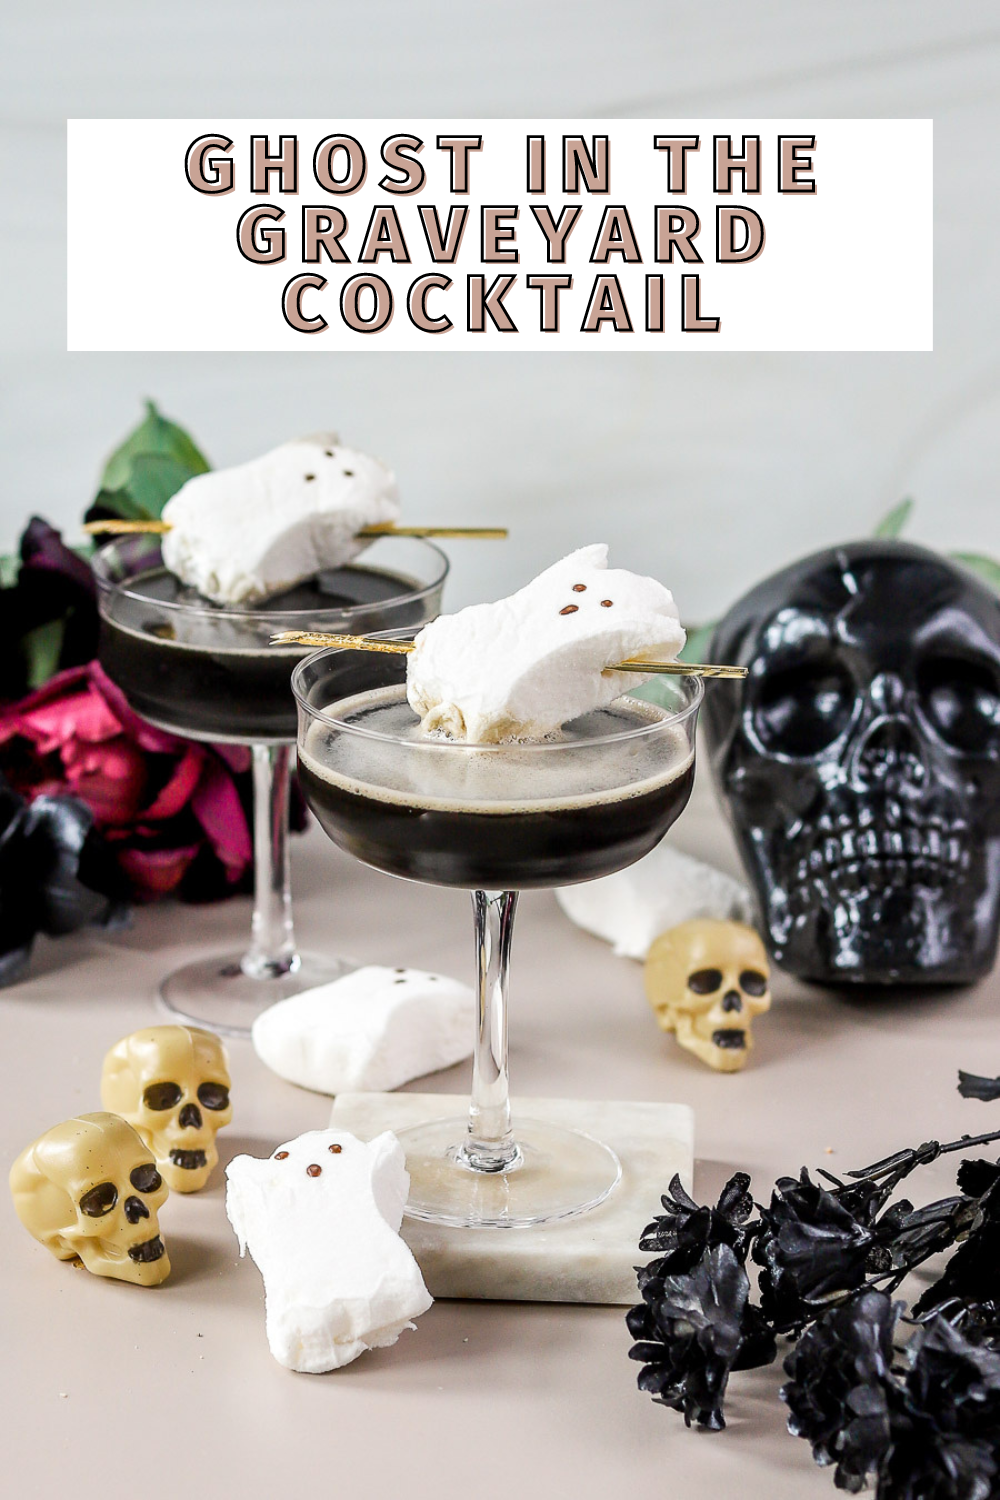 ghost in the graveyard cocktail is so perfect for halloween.